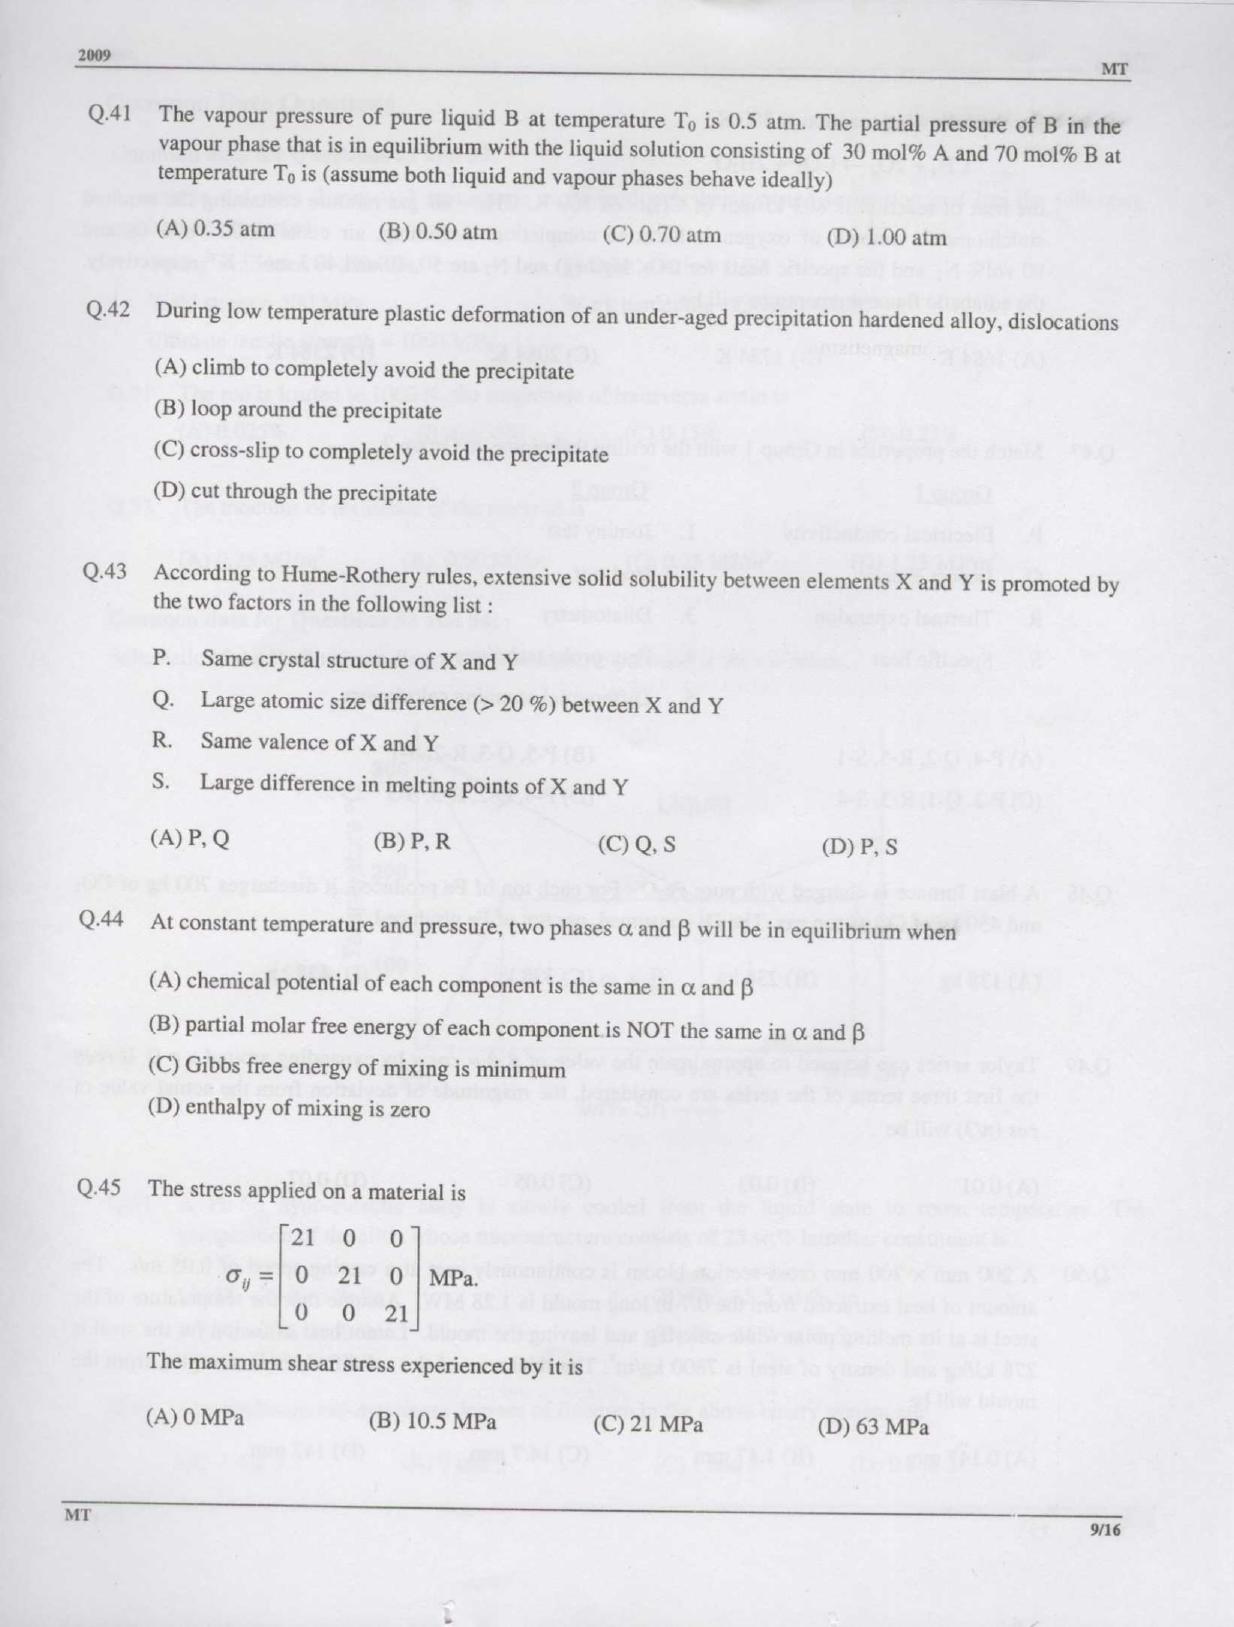 GATE 2009 Metallurgical Engineering (MT) Question Paper with Answer Key - Page 9